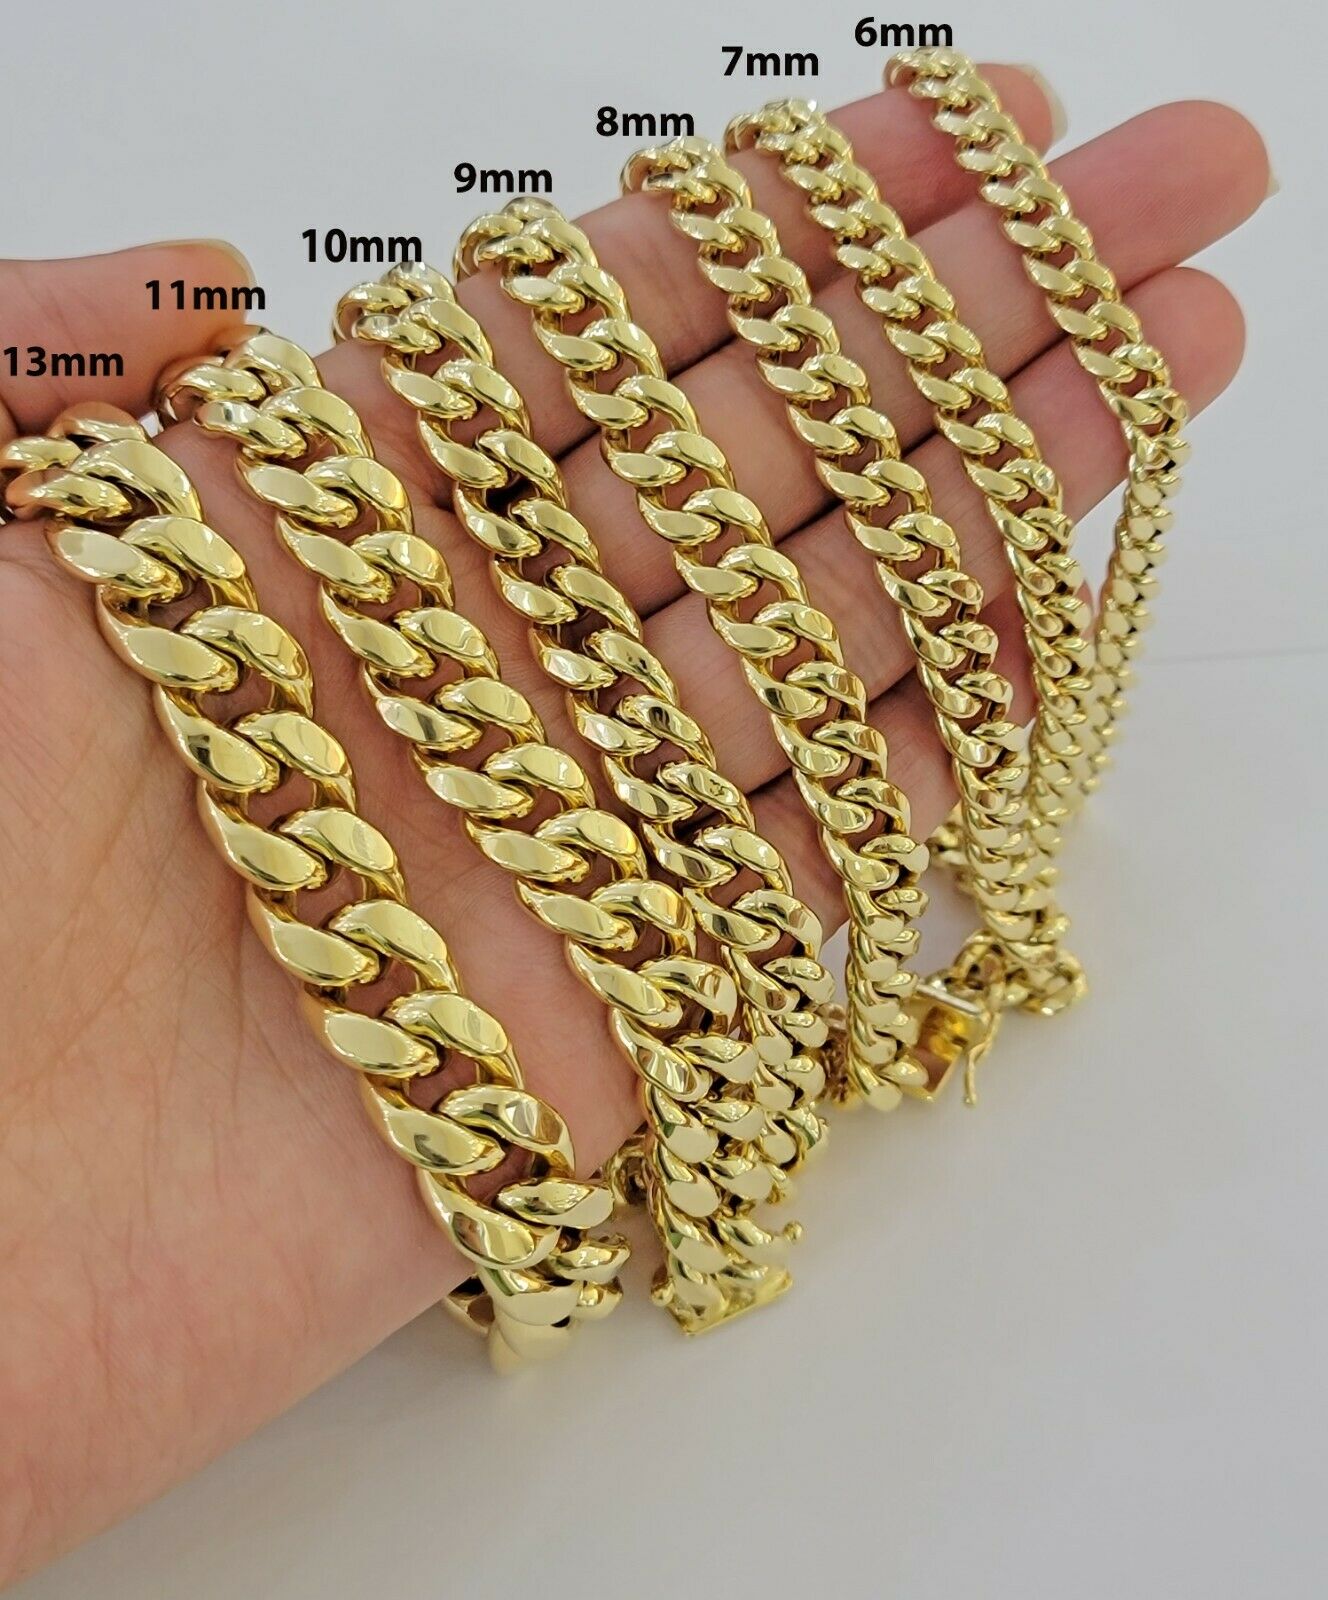 Miami Cuban Link Bracelet 8 Inches 8mm 38.2 Grams 32544: buy online in NYC.  Best price at TRAXNYC.